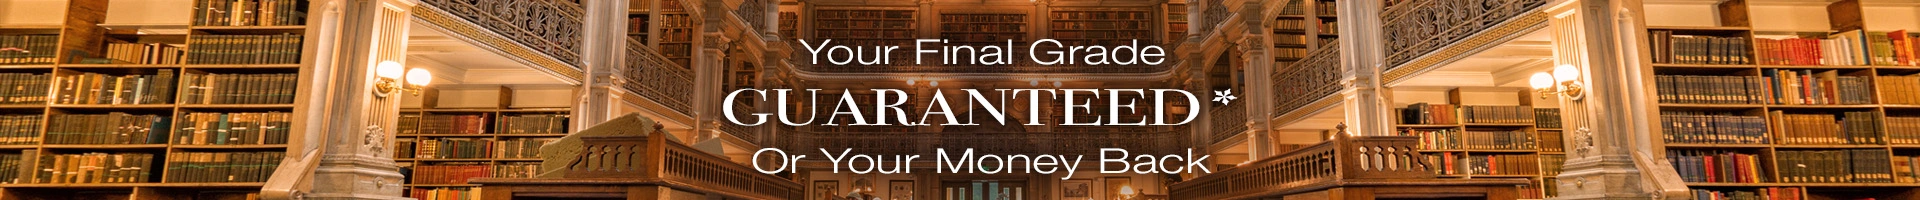 Image of a library overlayed with the text 'Your Final Grade Guaranteed, or your money back'